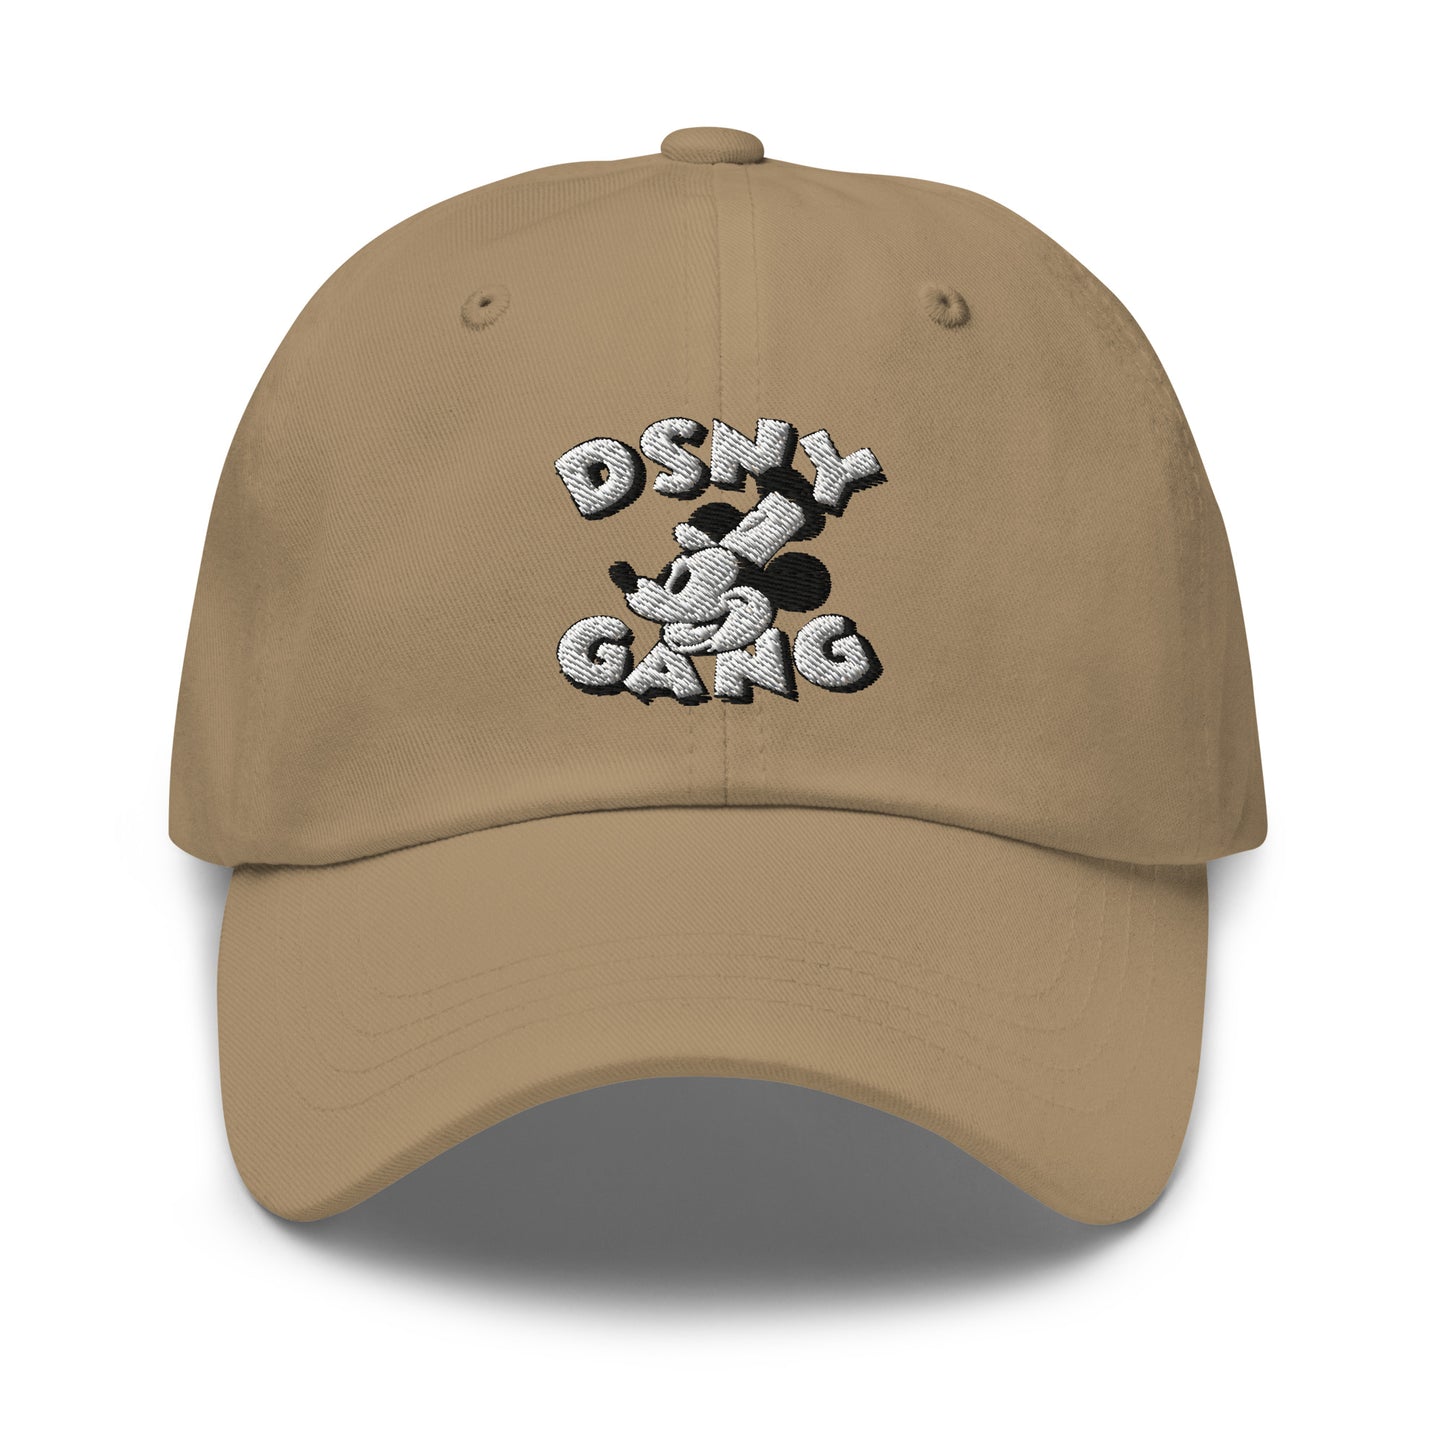 DSNY GANG Steamboat Willie Dad Hat